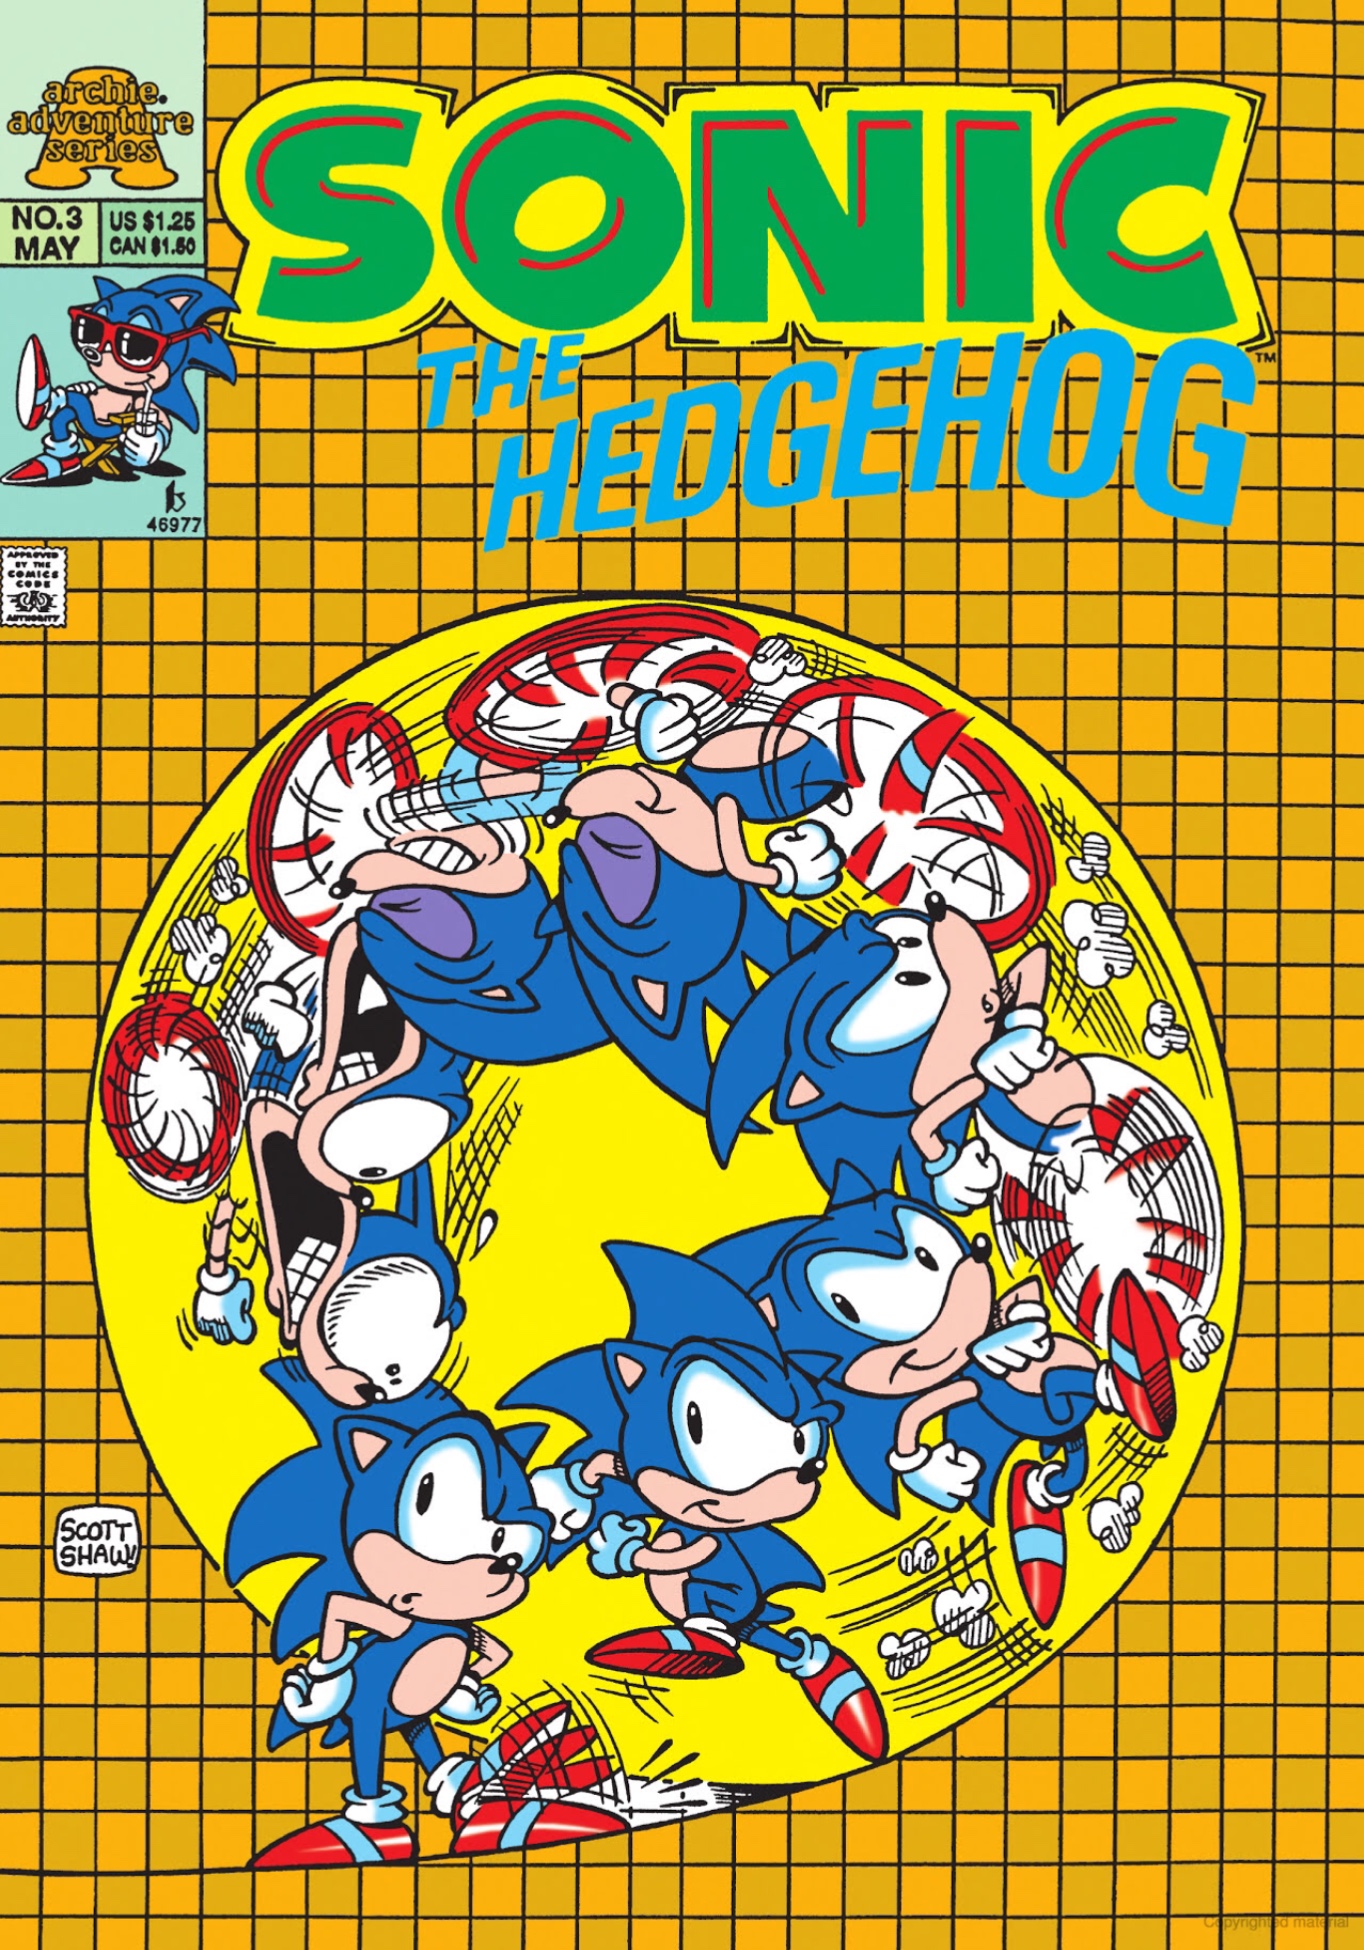 Archie Sonic the Hedgehog Issue 3 (miniseries) | Sonic ...